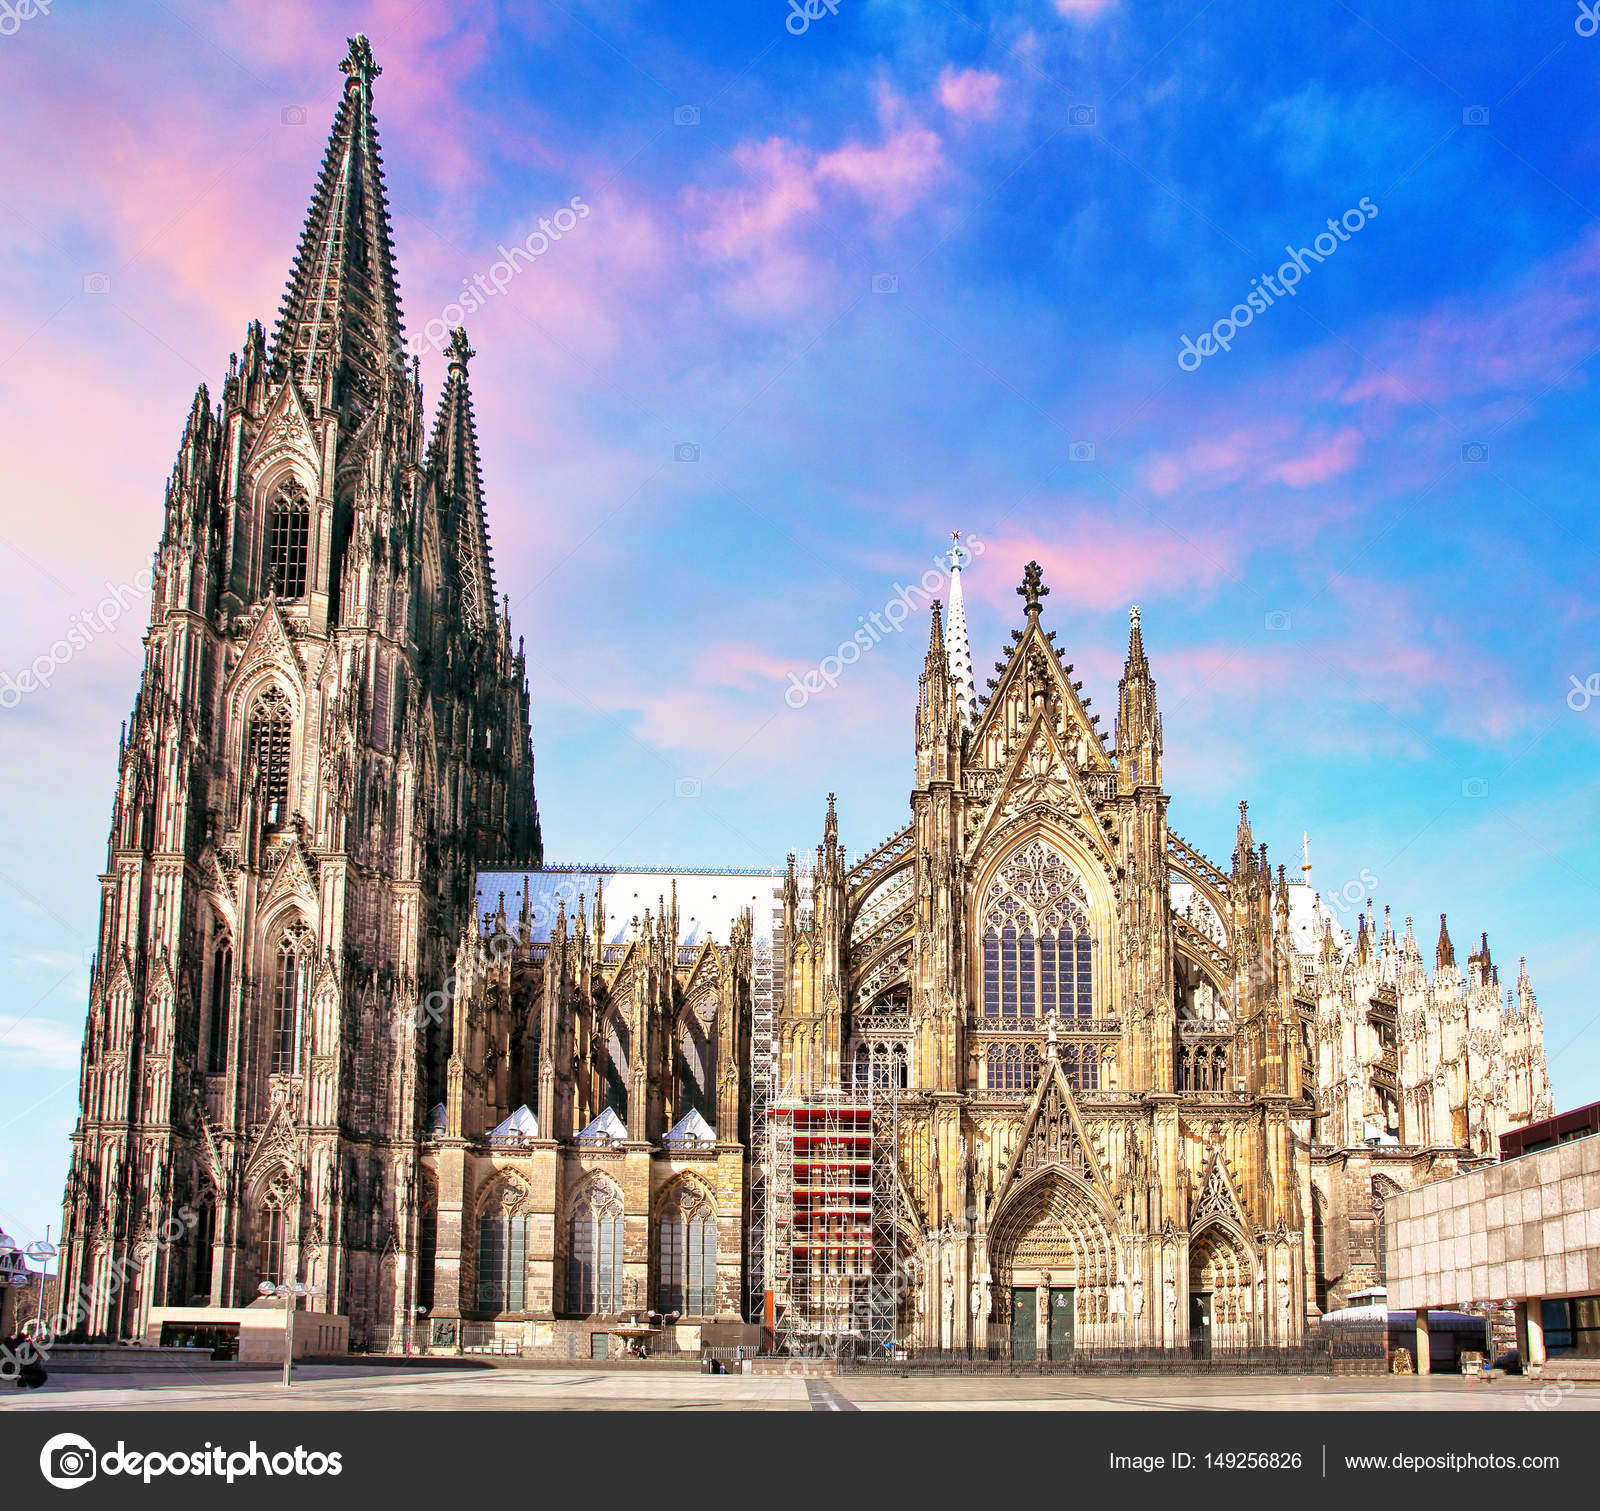 Cologne cathedral, Germany — Stock Photo © TTstudio #149256826